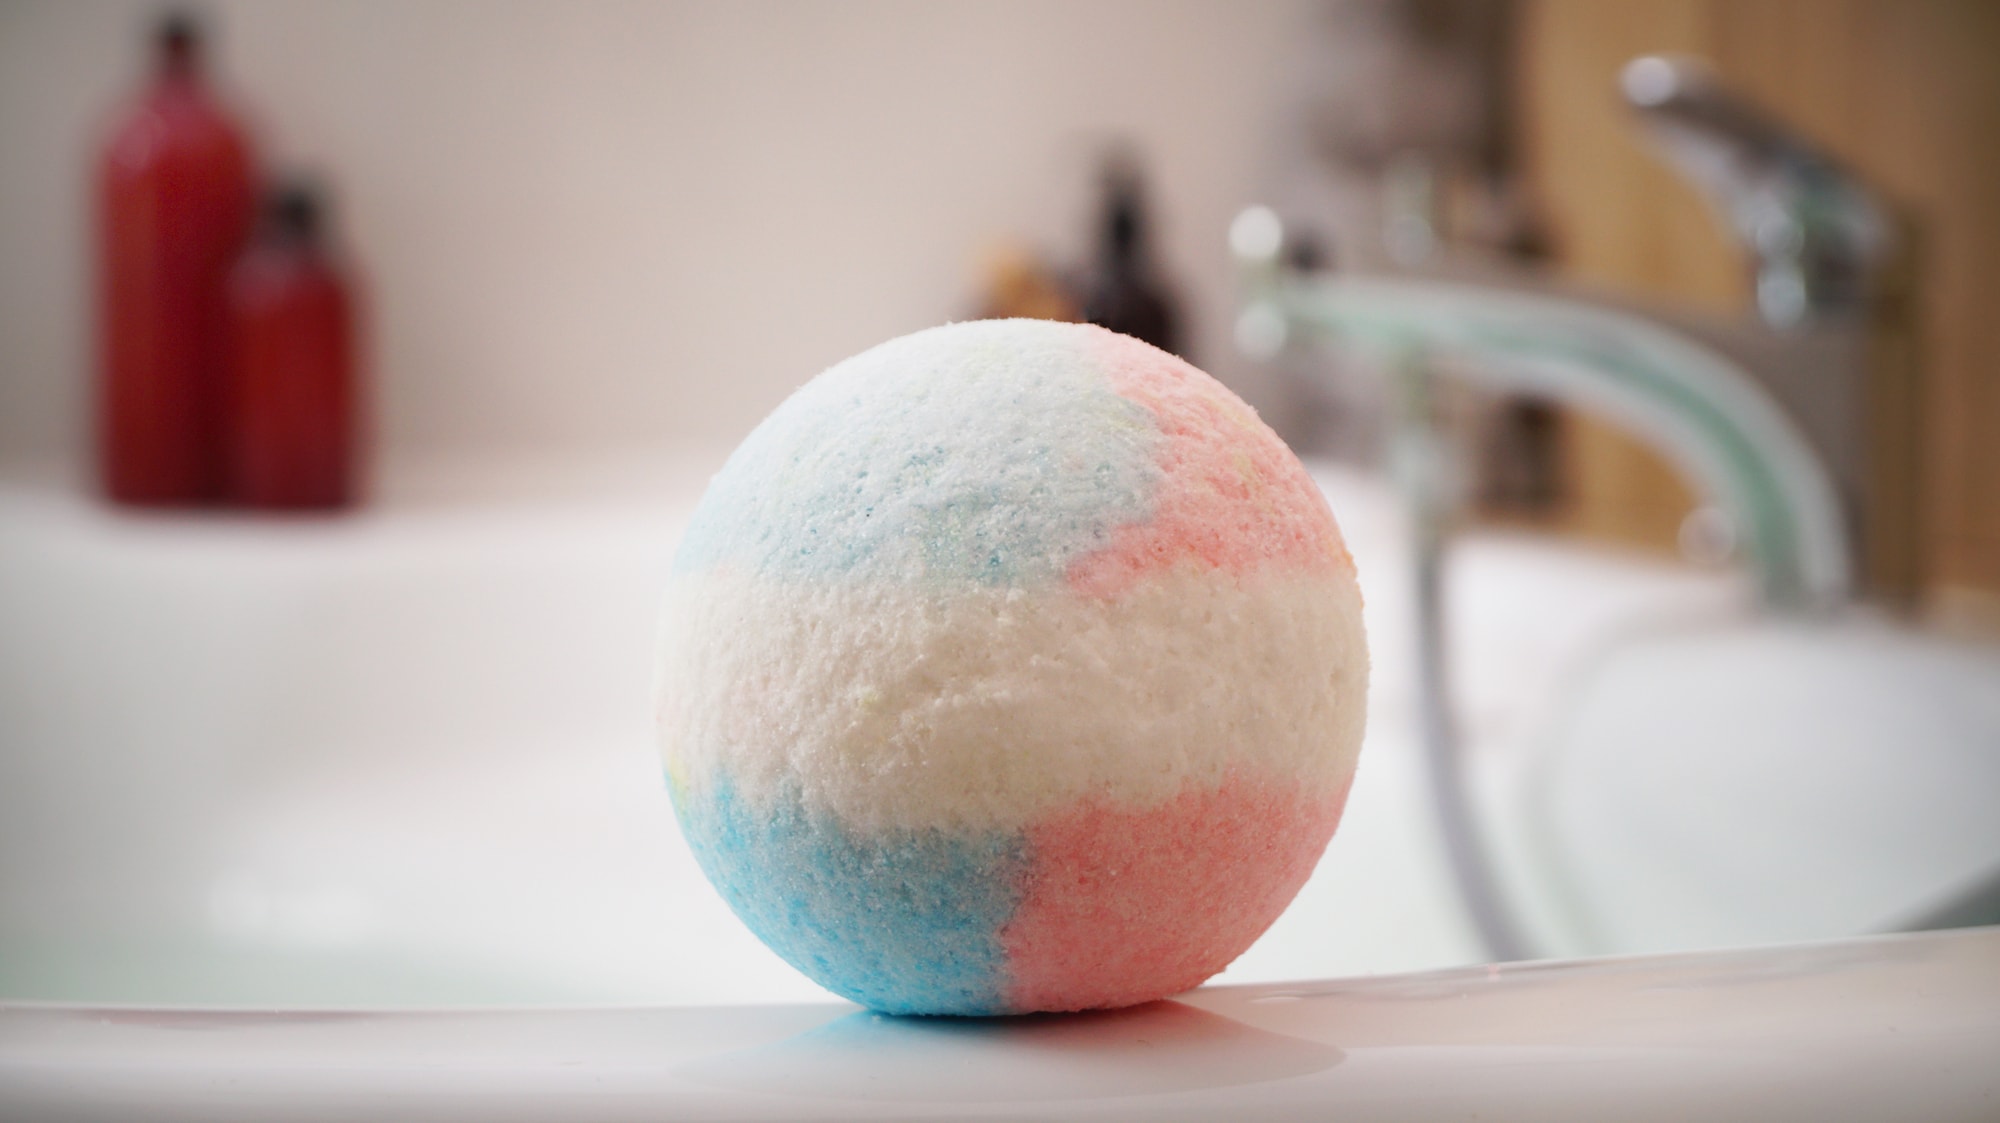 What's the best bath bomb recipe for sensitive skin?